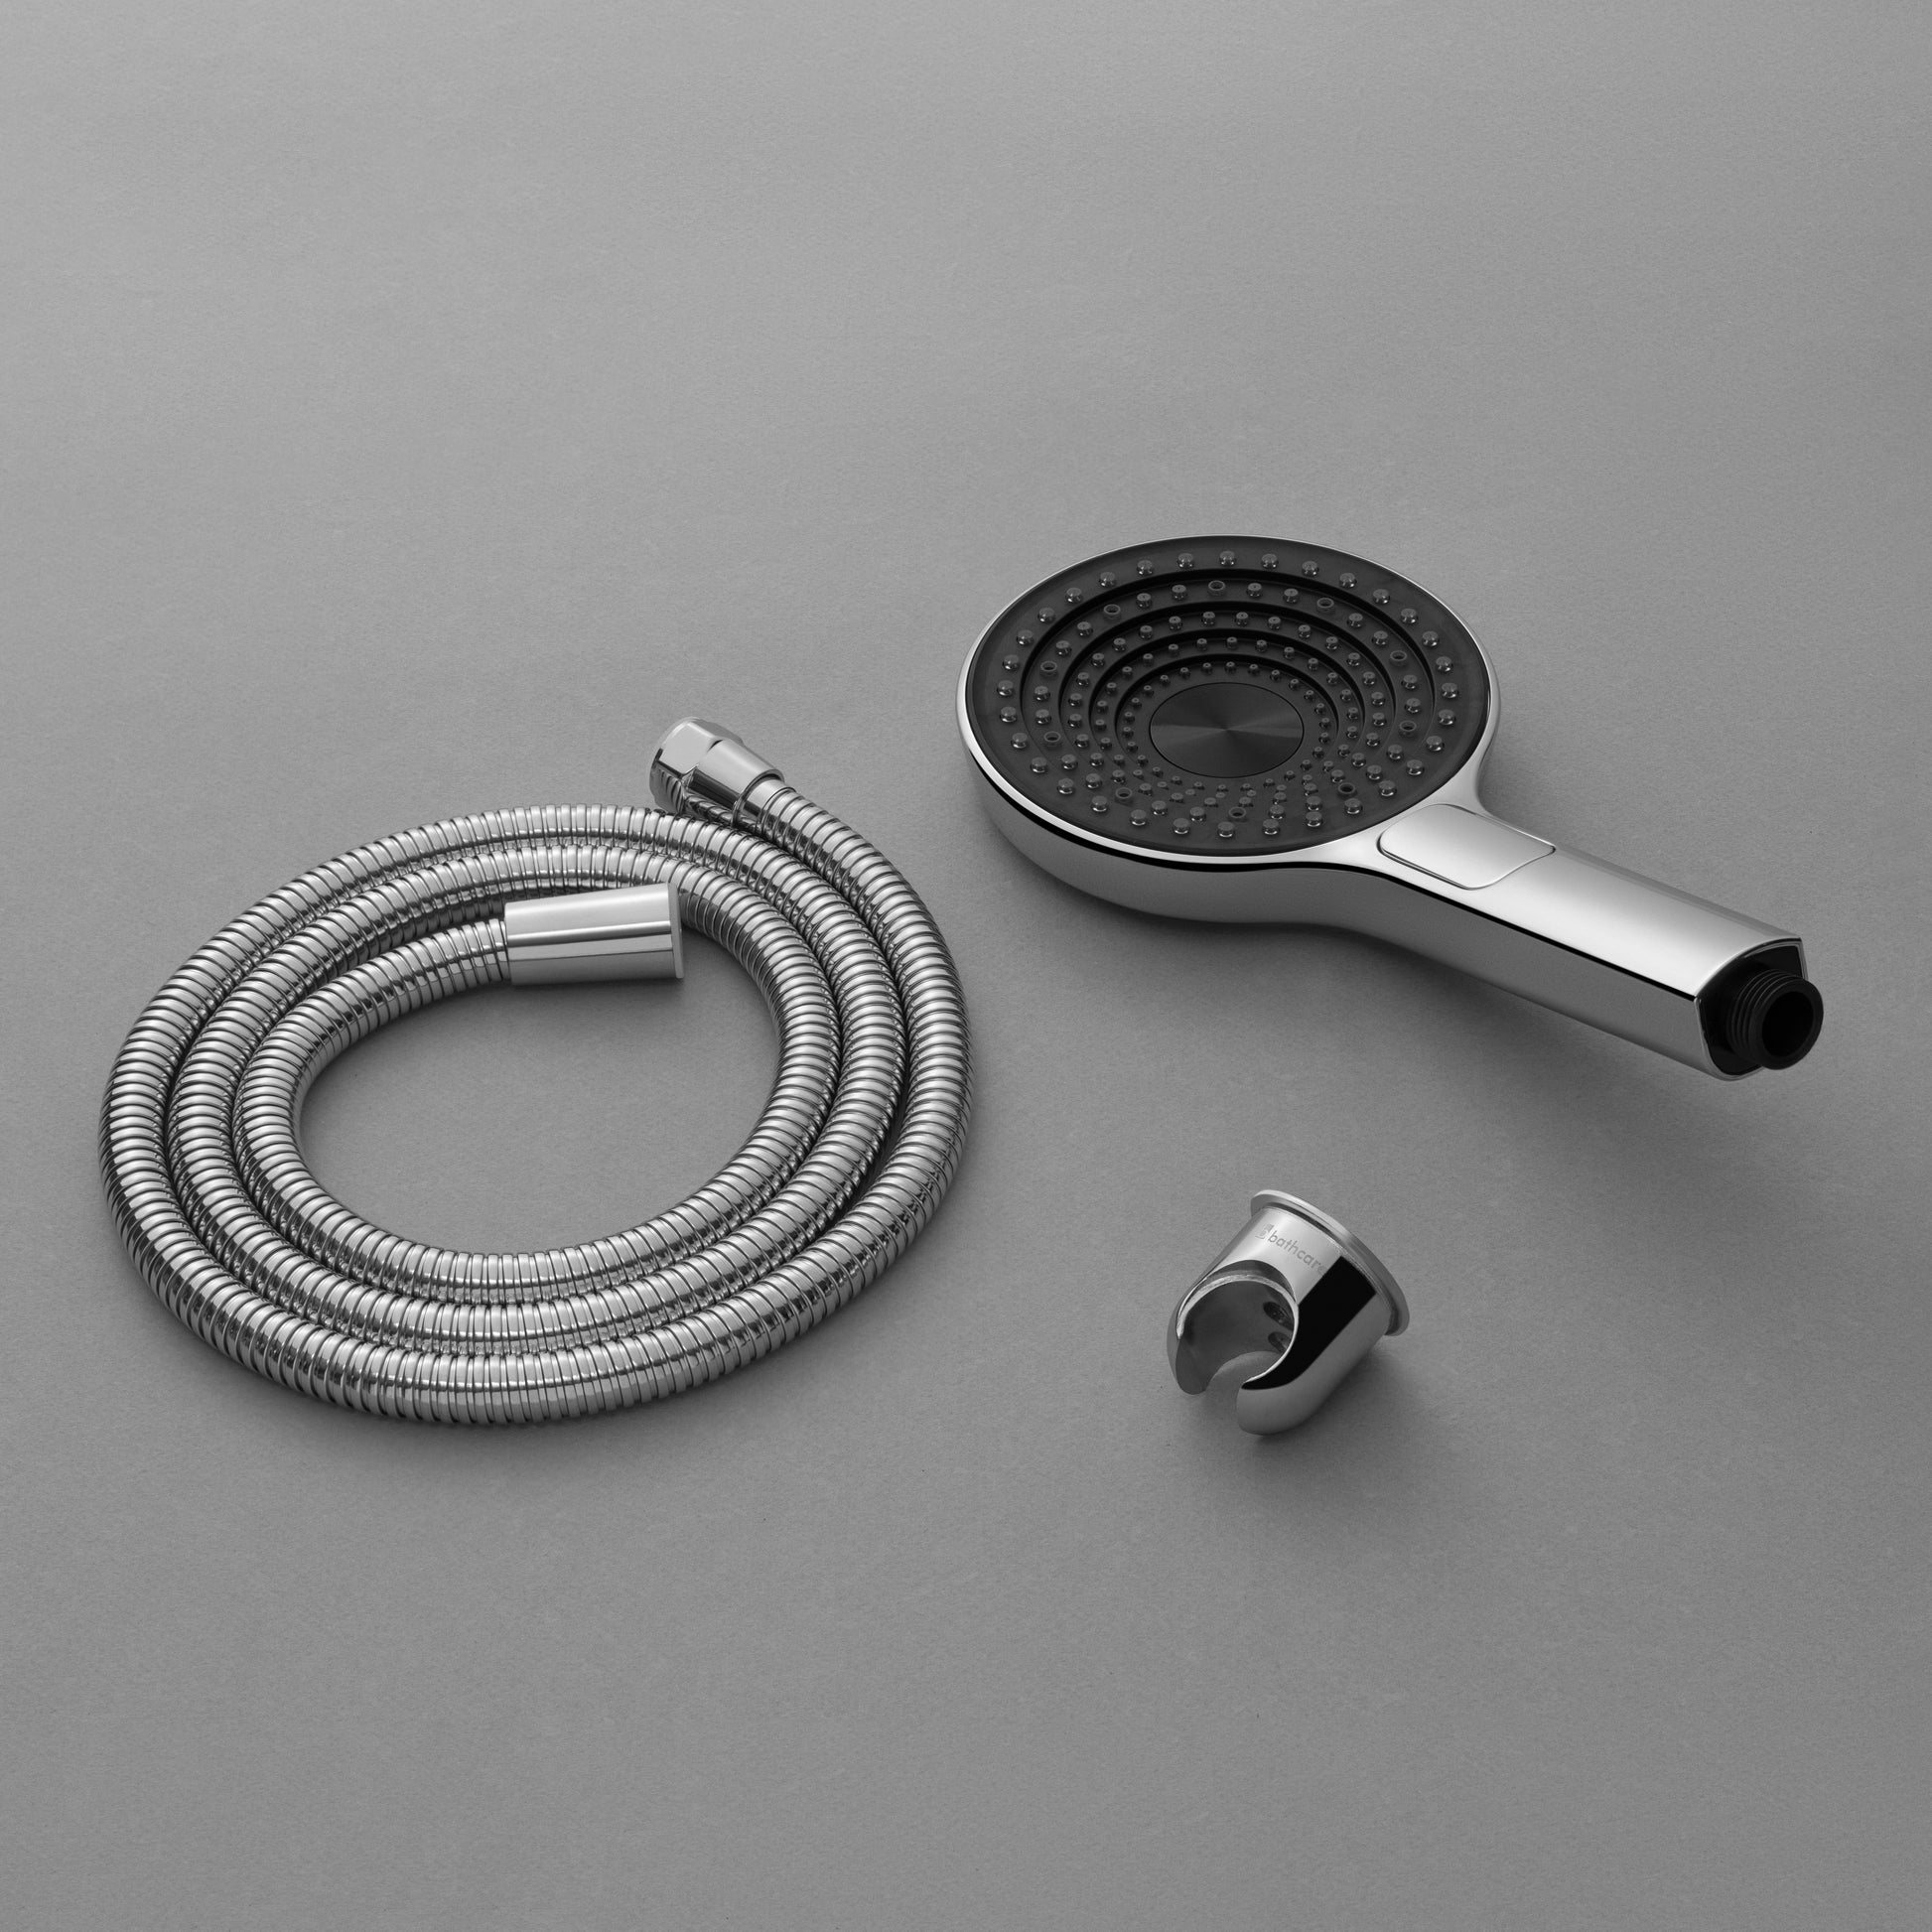 TELEPHONE SHOWER SET MORAL ROUND 2 FLOW ABS CHROME FINISH WITH 1.5 METER SS PULLOUT SHOWER TUBE AND ABS WALL HOOK